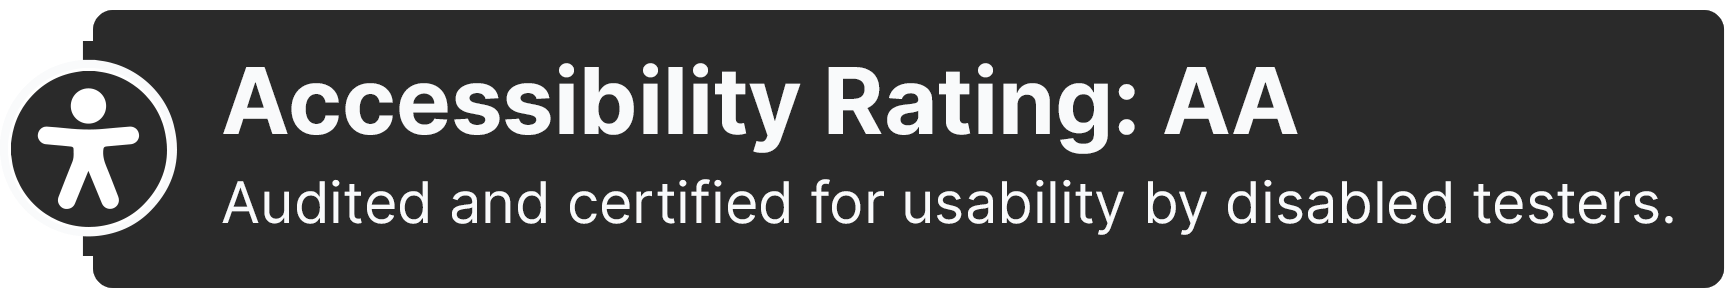 Accessibility Rating: AA, Audited and certified for usability by disabled testers.